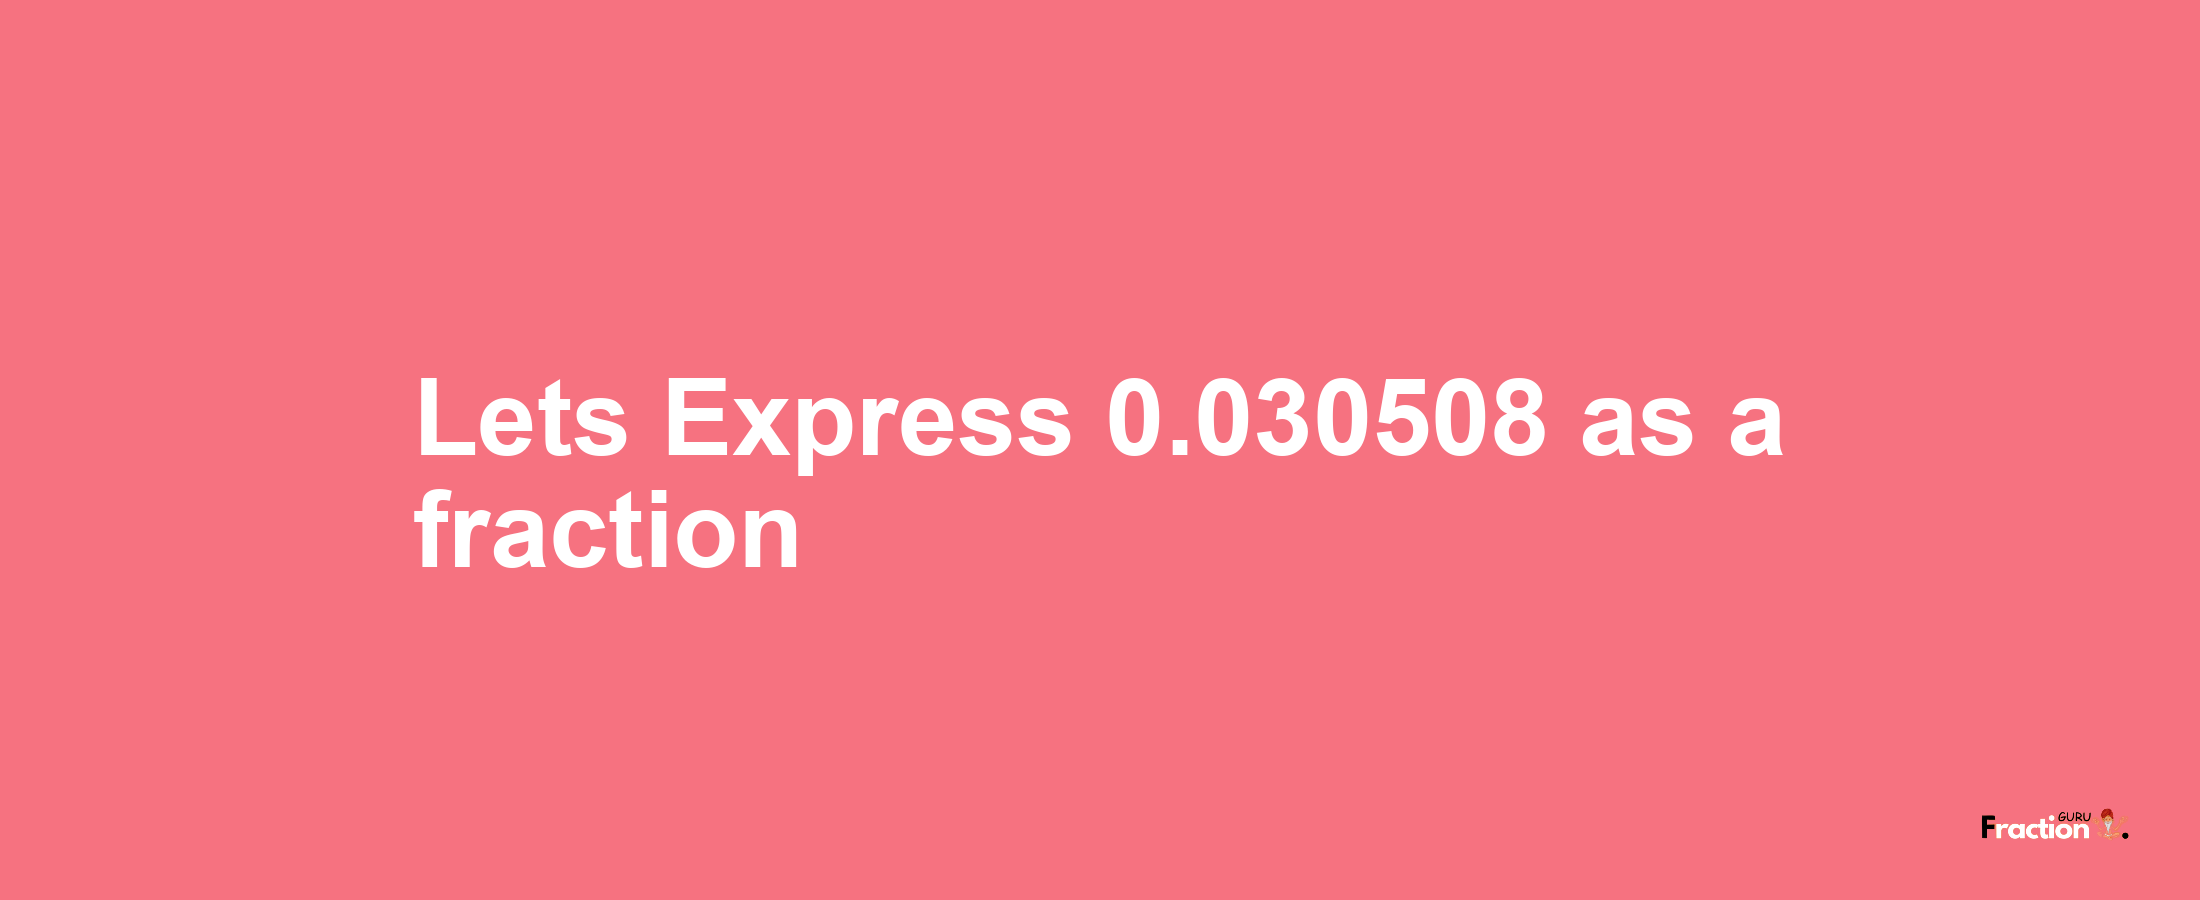 Lets Express 0.030508 as afraction